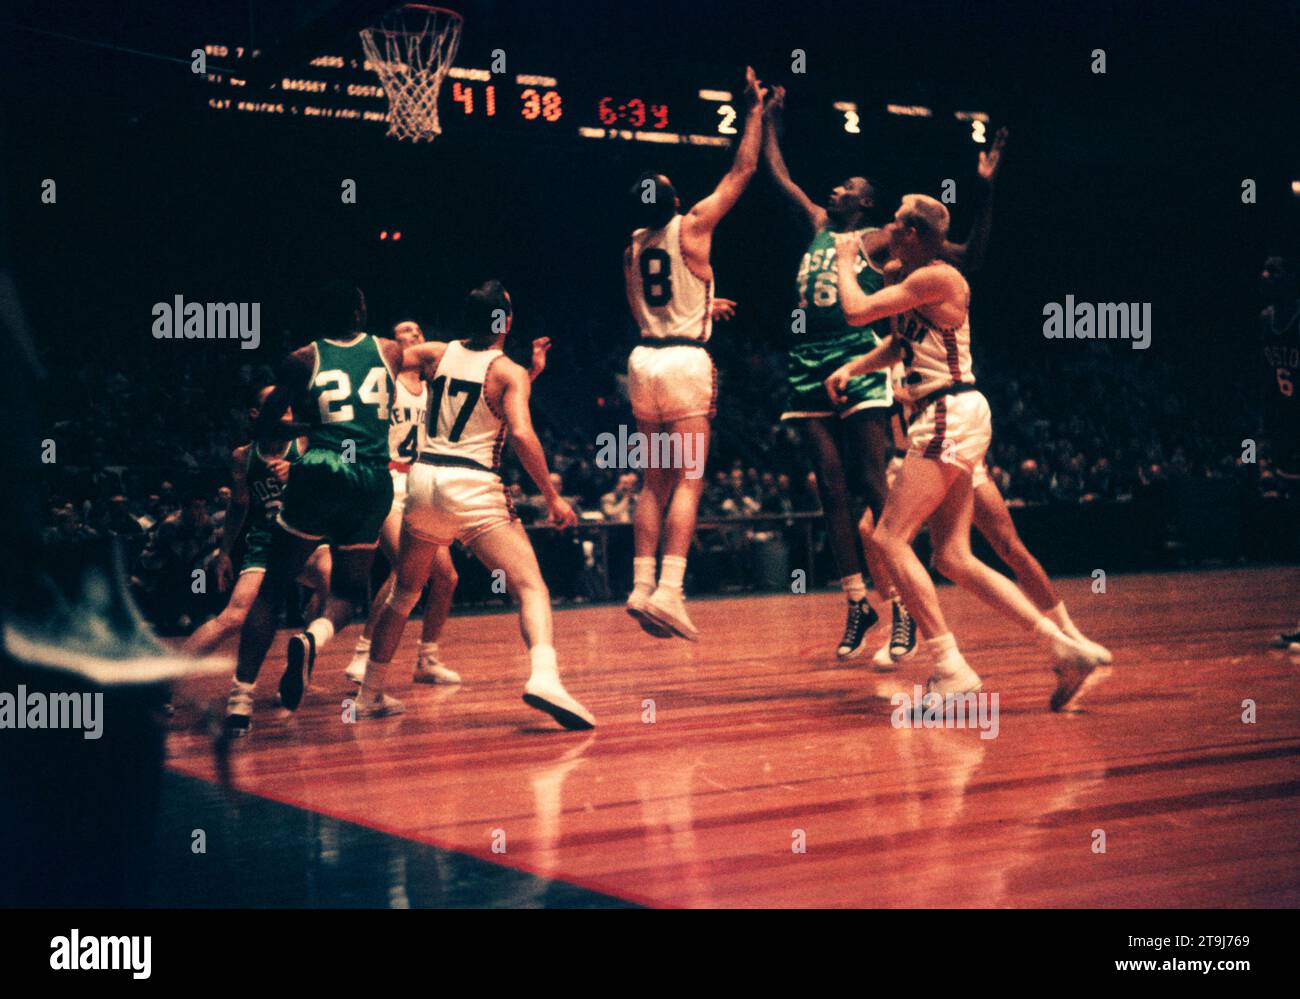 NEW YORK, NY - OCTOBER 25:  Mike Farmer #8 of the New York Knicks and Bennie Swain #16 of the Boston Celtics fight for the rebound during an NBA game on October 25, 1958 at the Madison Square Garden in New York, New York.  (Photo by Hy Peskin) *** Local Caption *** Mike Farmer;Bennie Swain Stock Photo